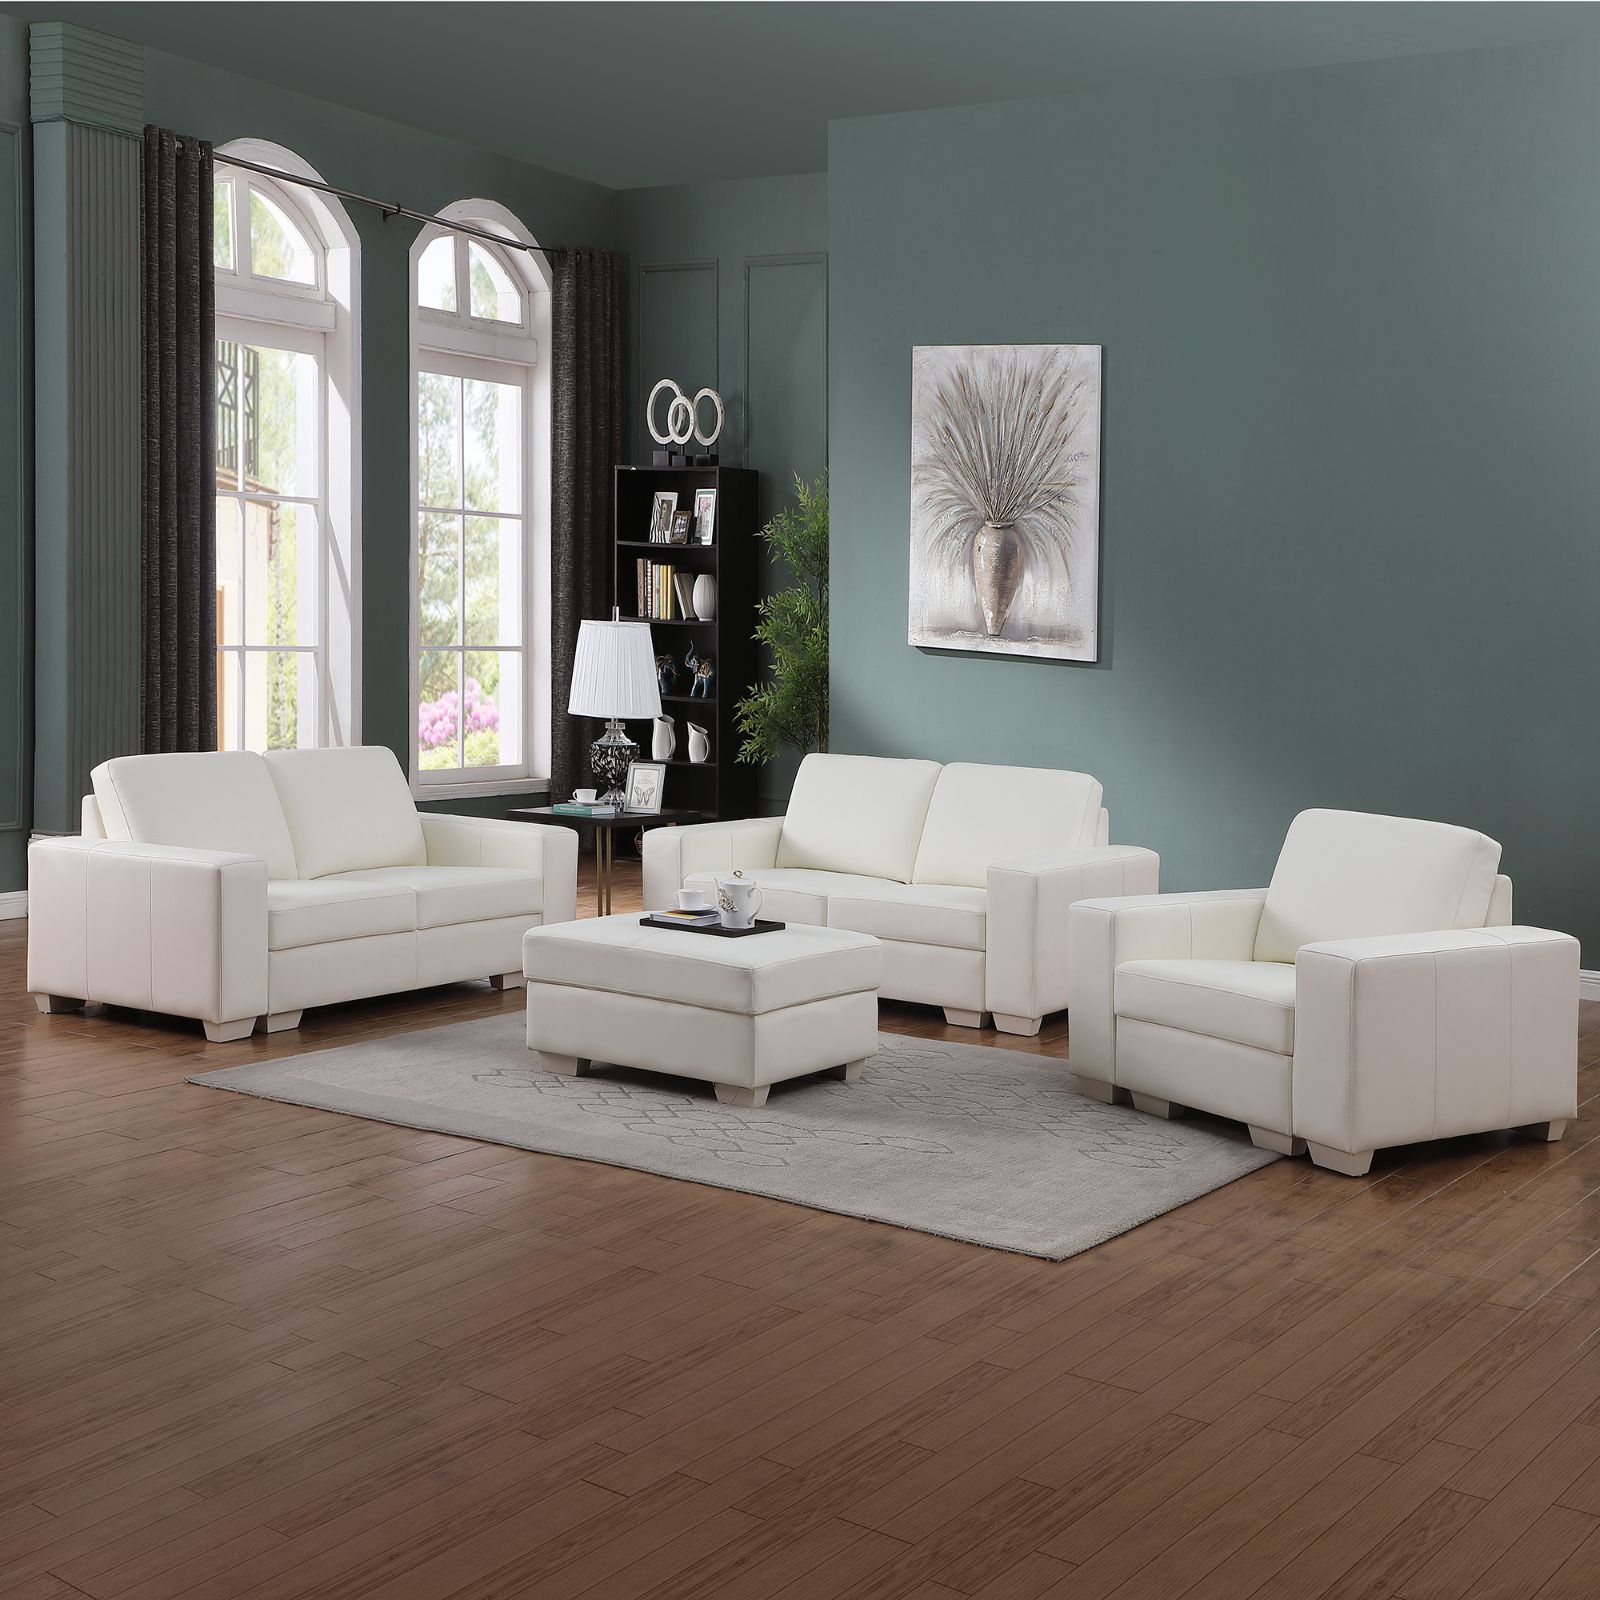 White Cow Top Leather 7-Piece Living Room Sofa Set